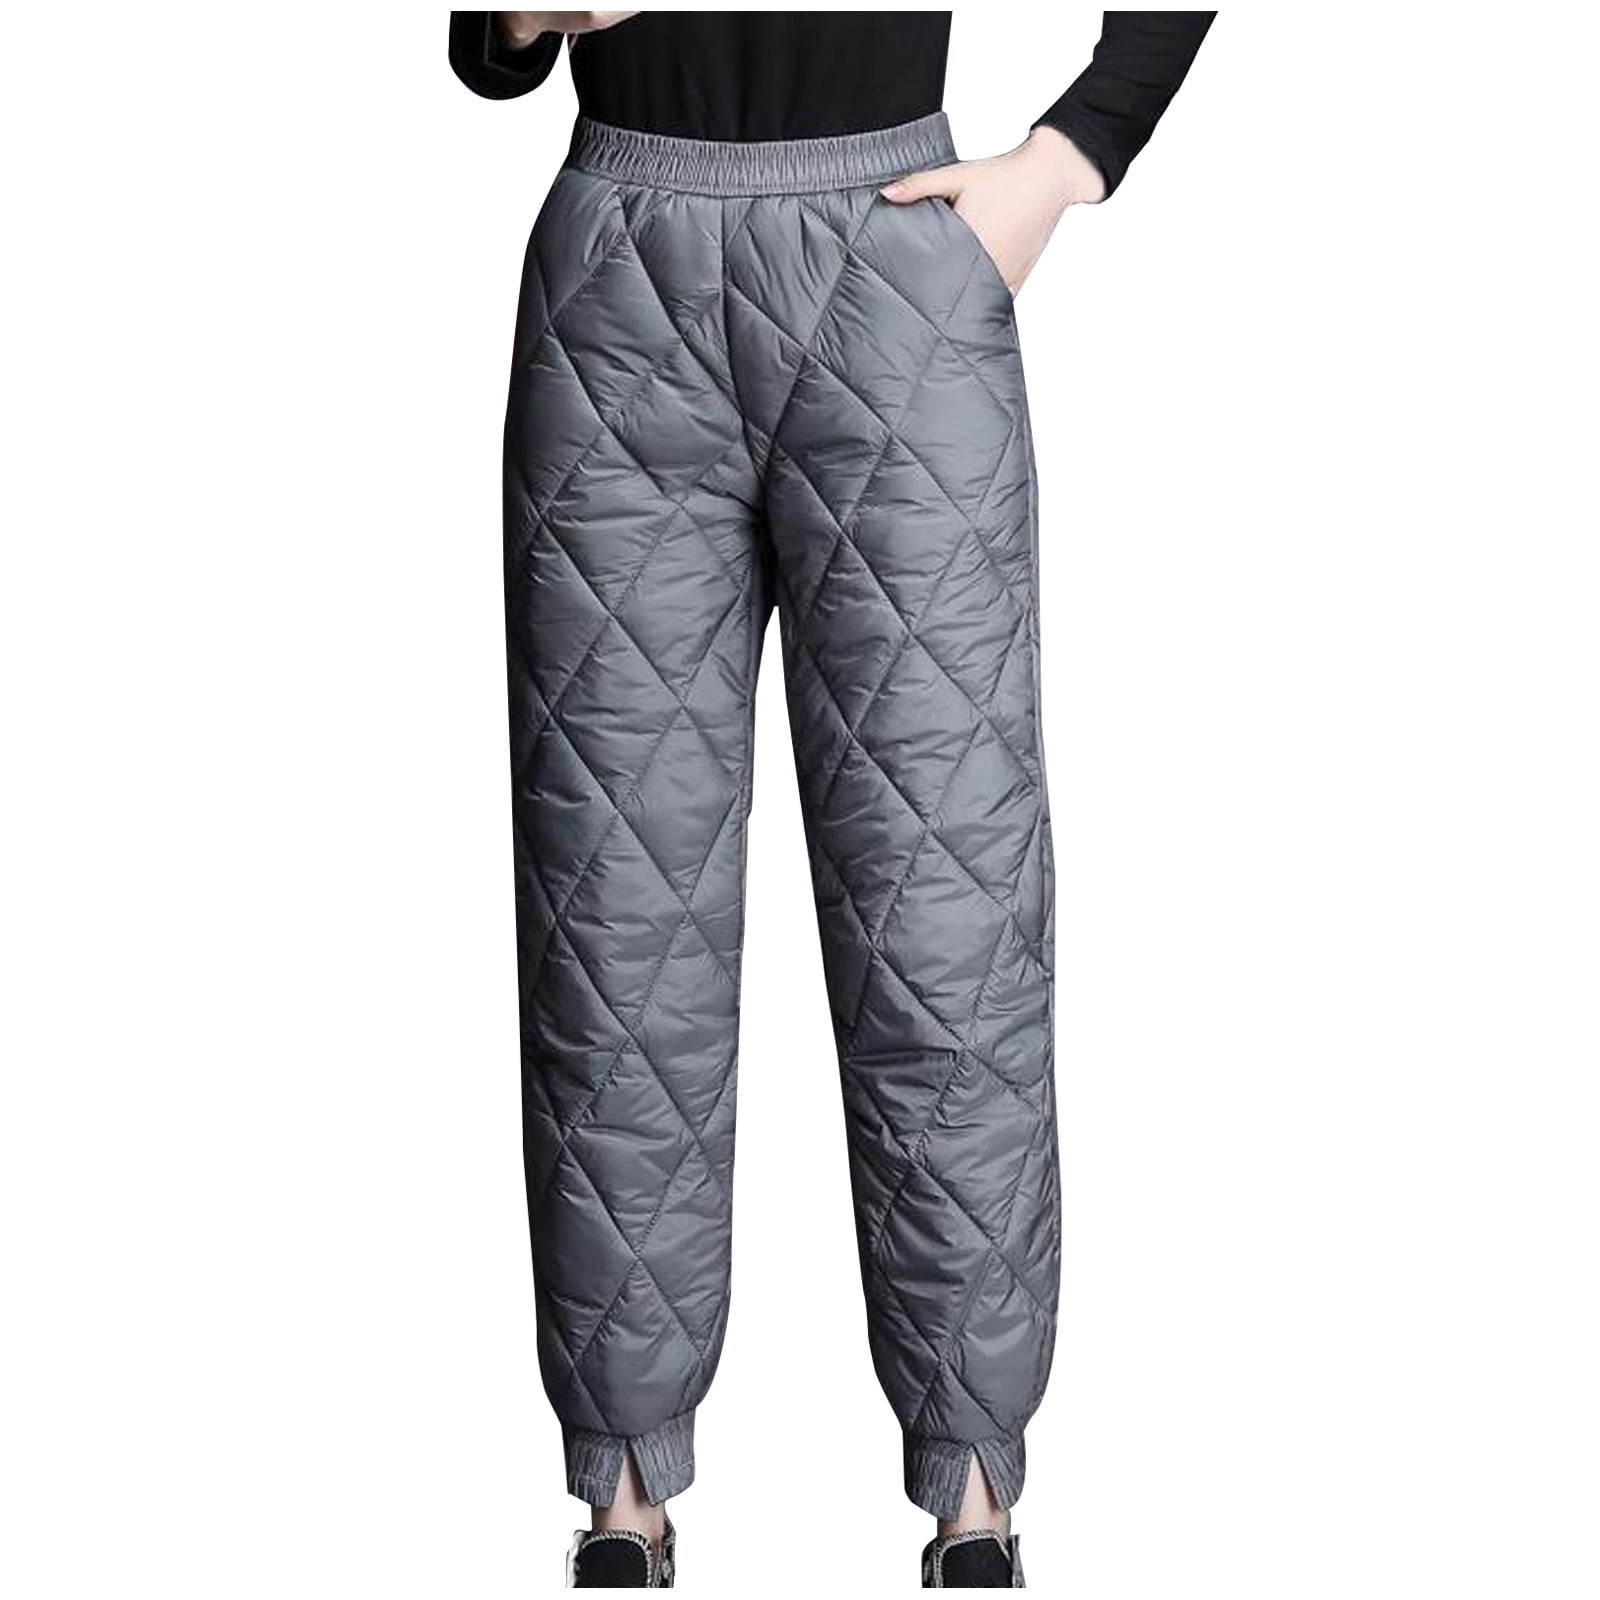 Hfyihgf Women's Lightweight Puffy Pants Quilted Snow Pants Puffer